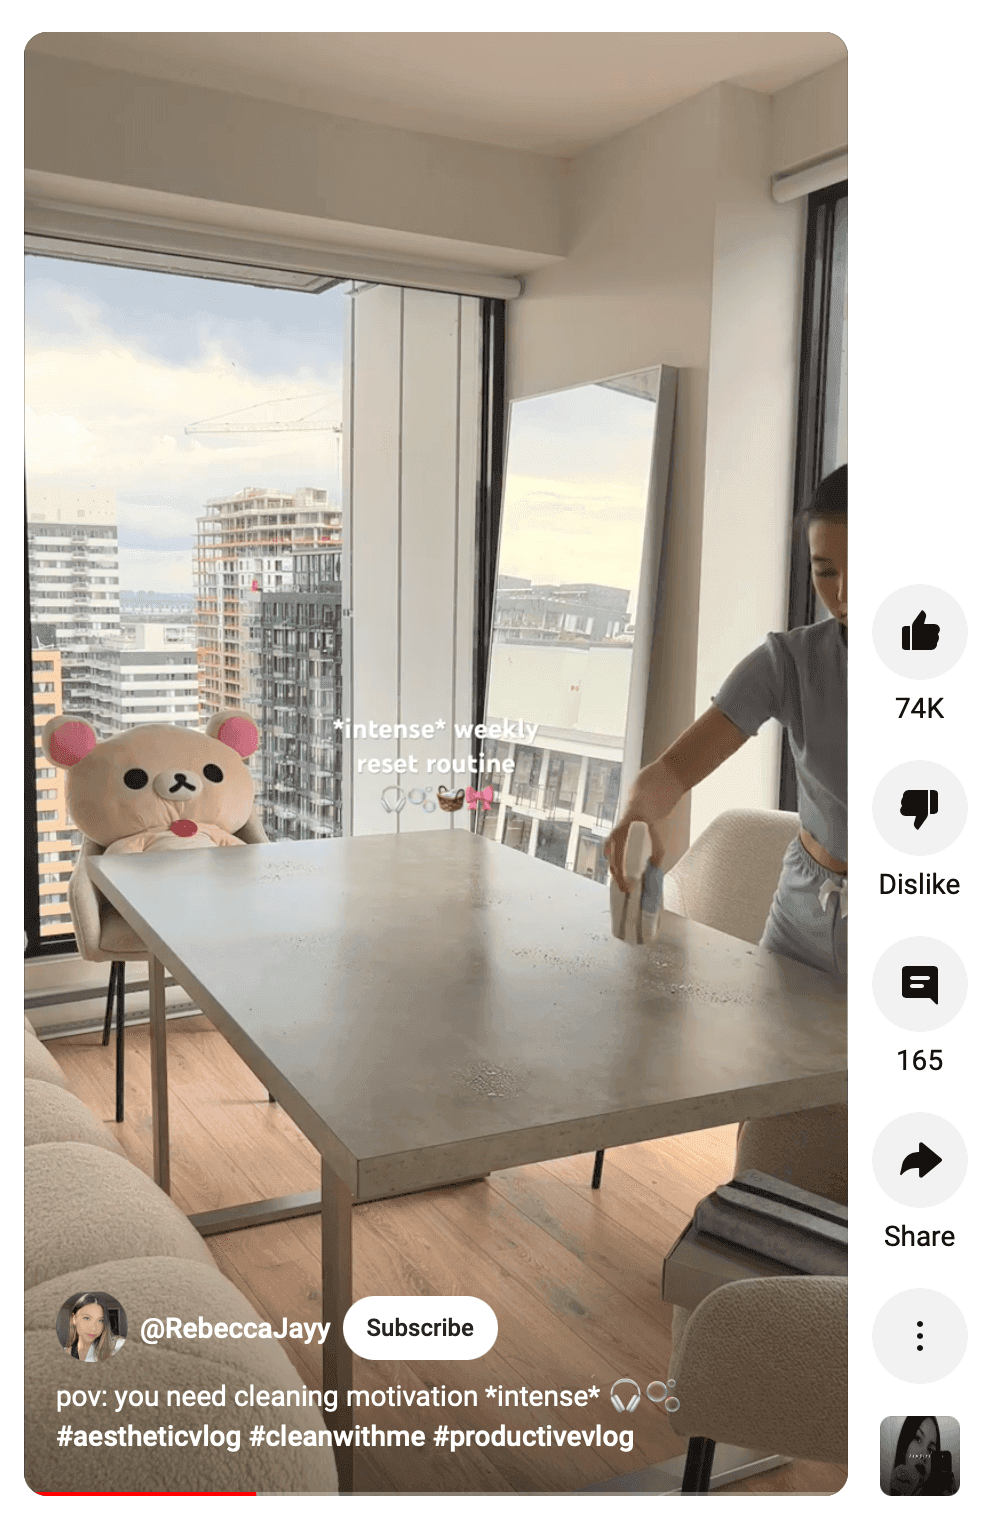 Dining room in an apartment with a view of a city